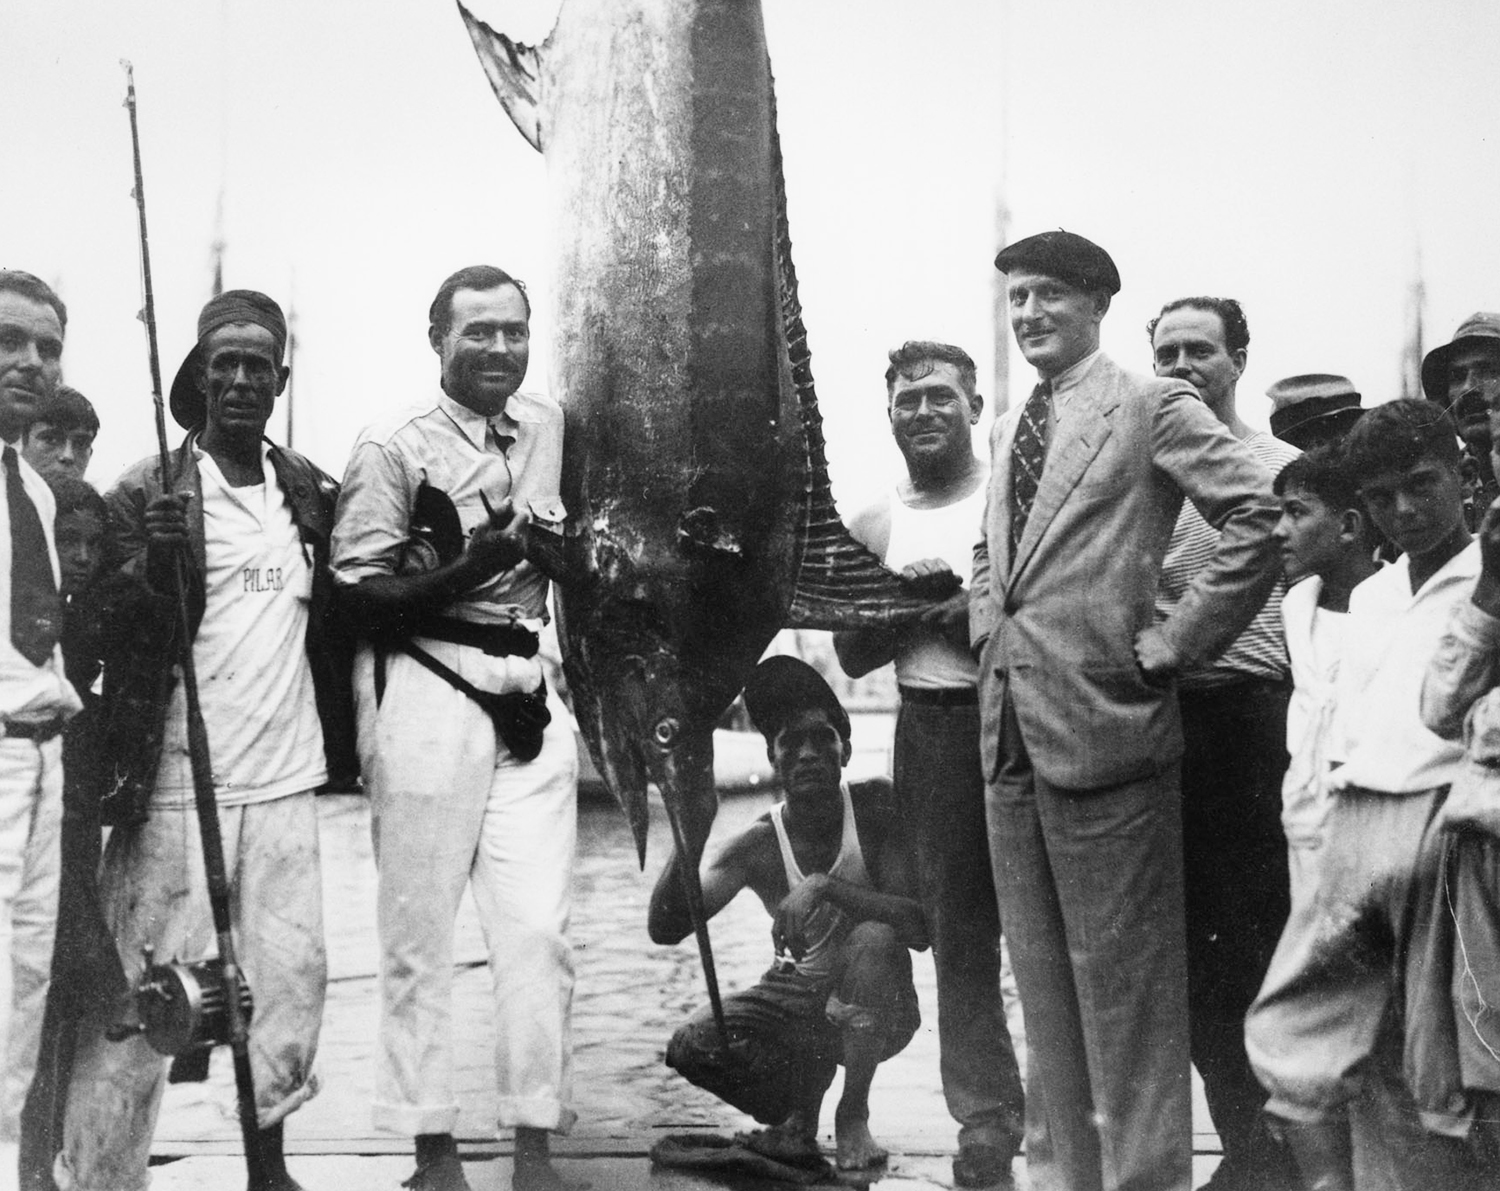 historical photograph of ernest hemingway, huge marlin, and crowd at the marina in cuba.